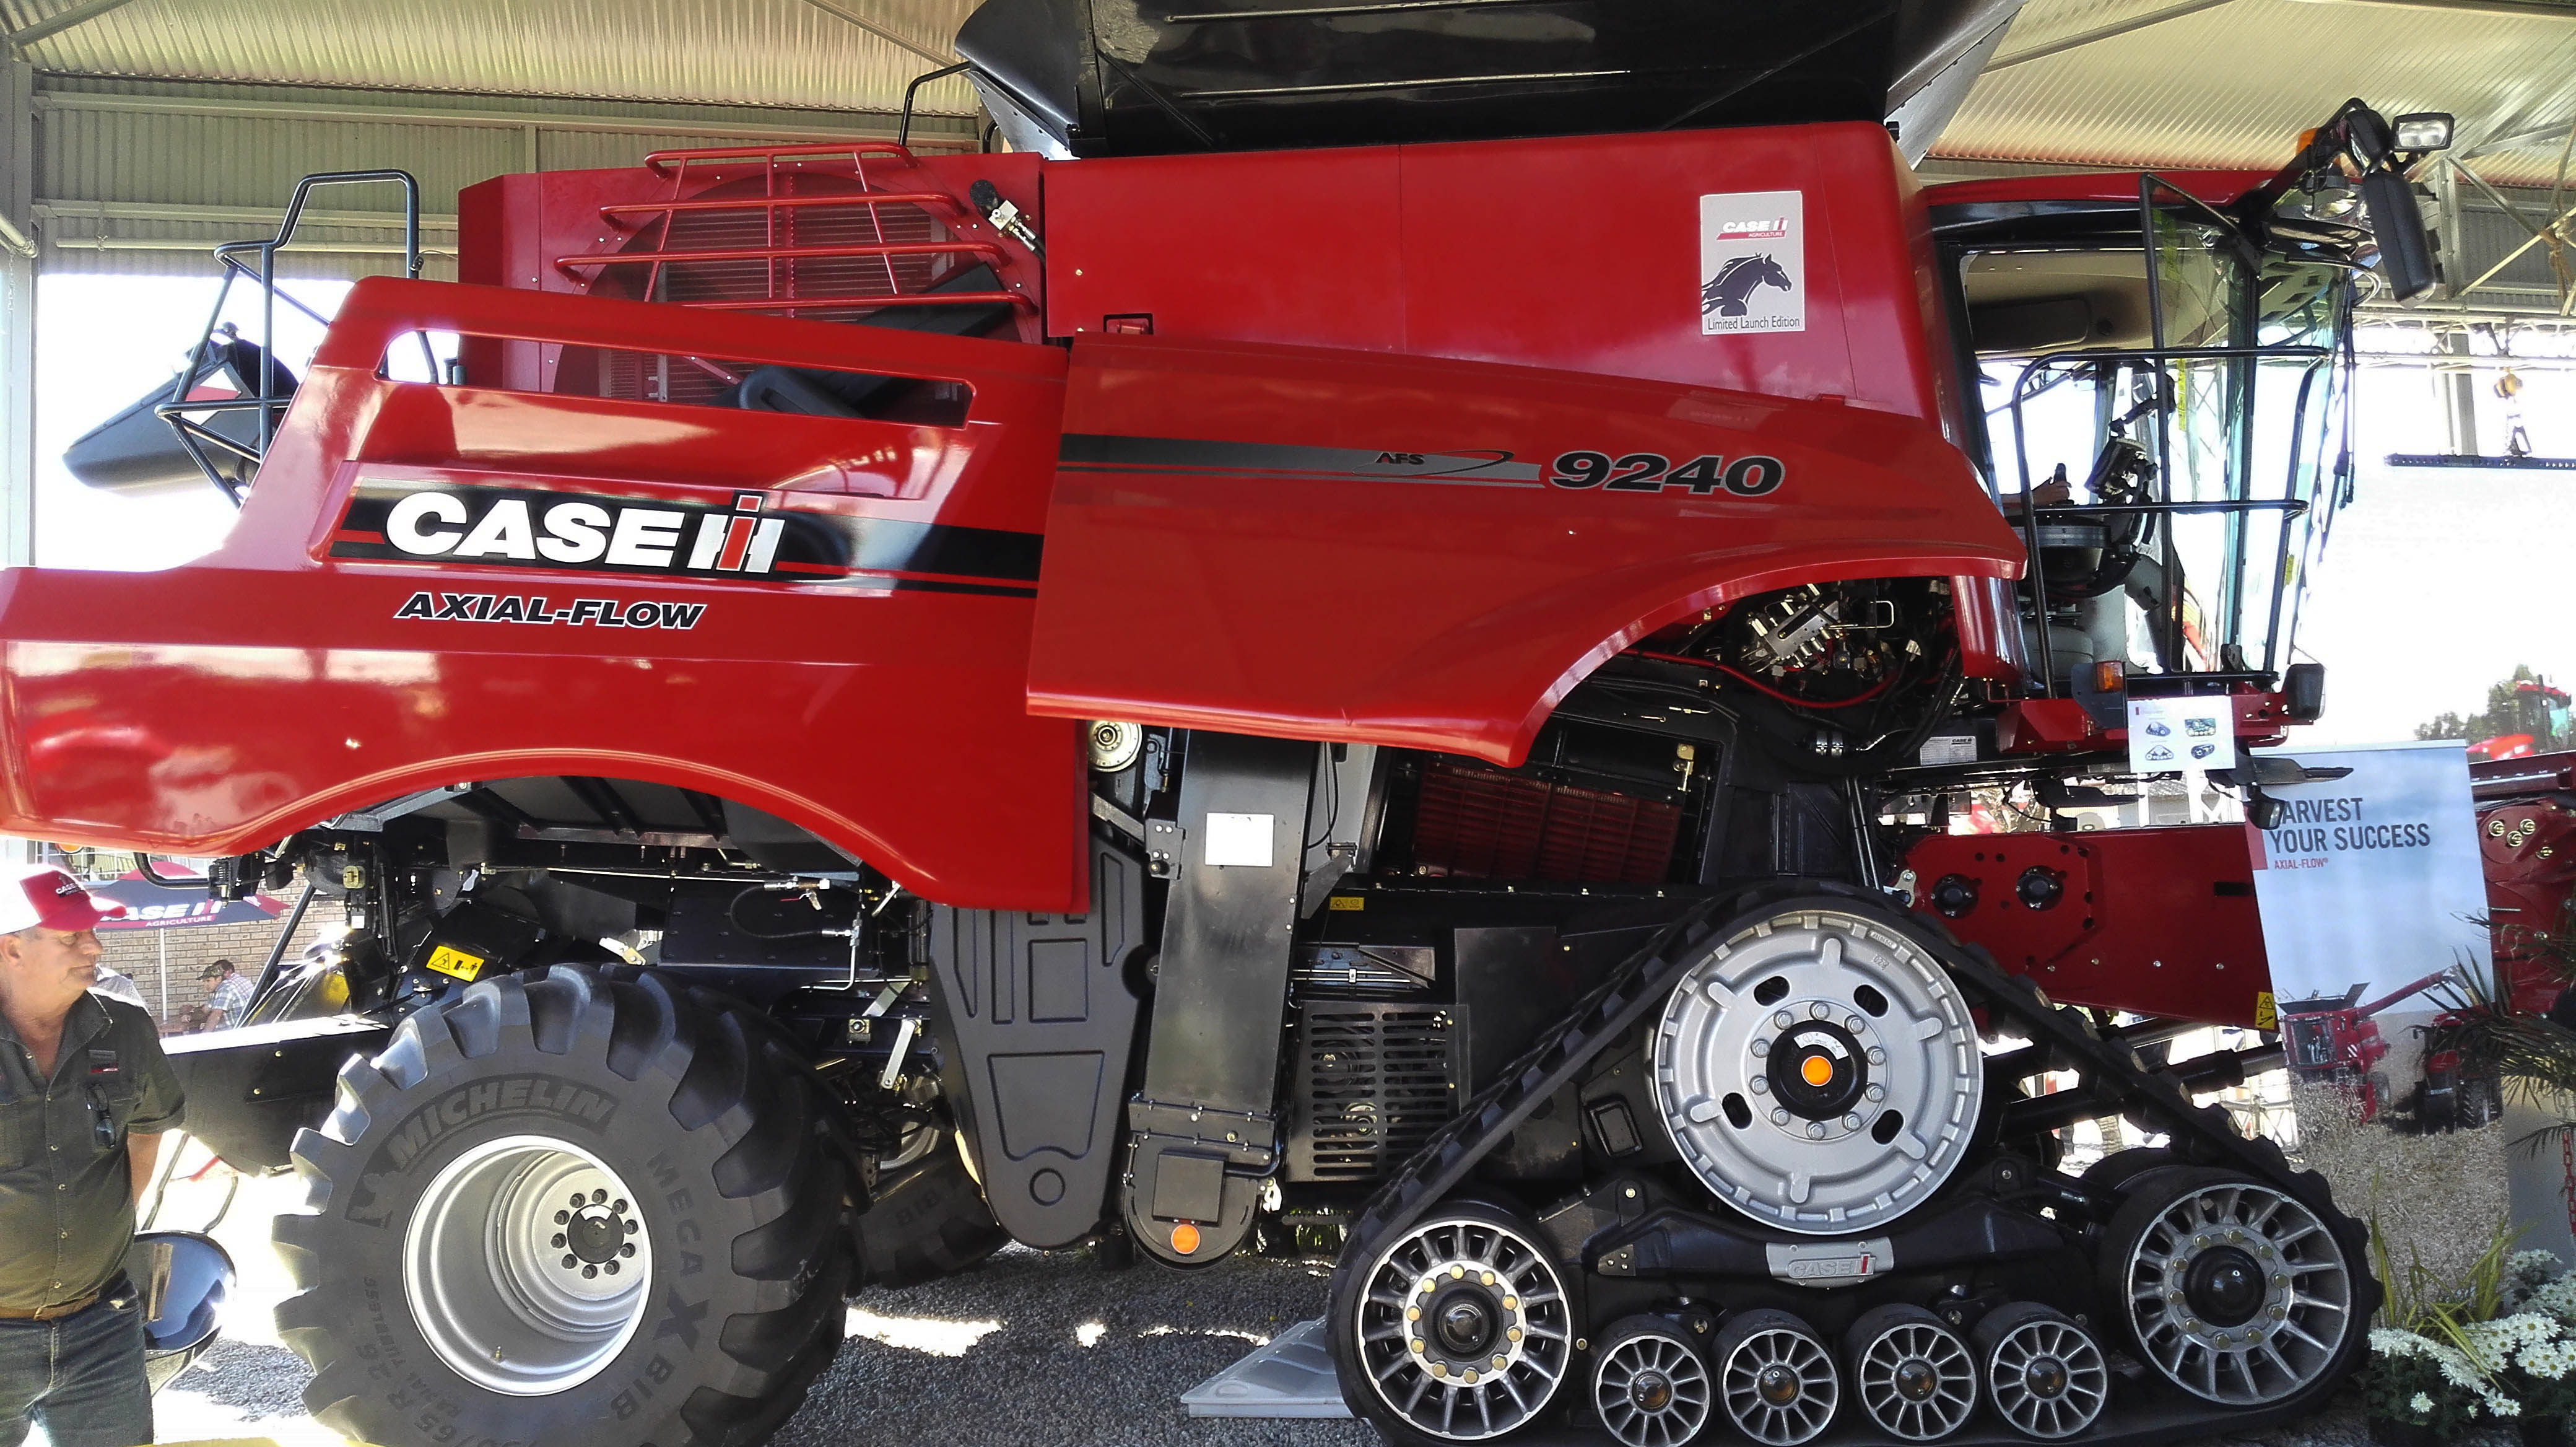 CASE IH SHOWCASES ITS TRACK TECHNOLOGY AT NAMPO 2017